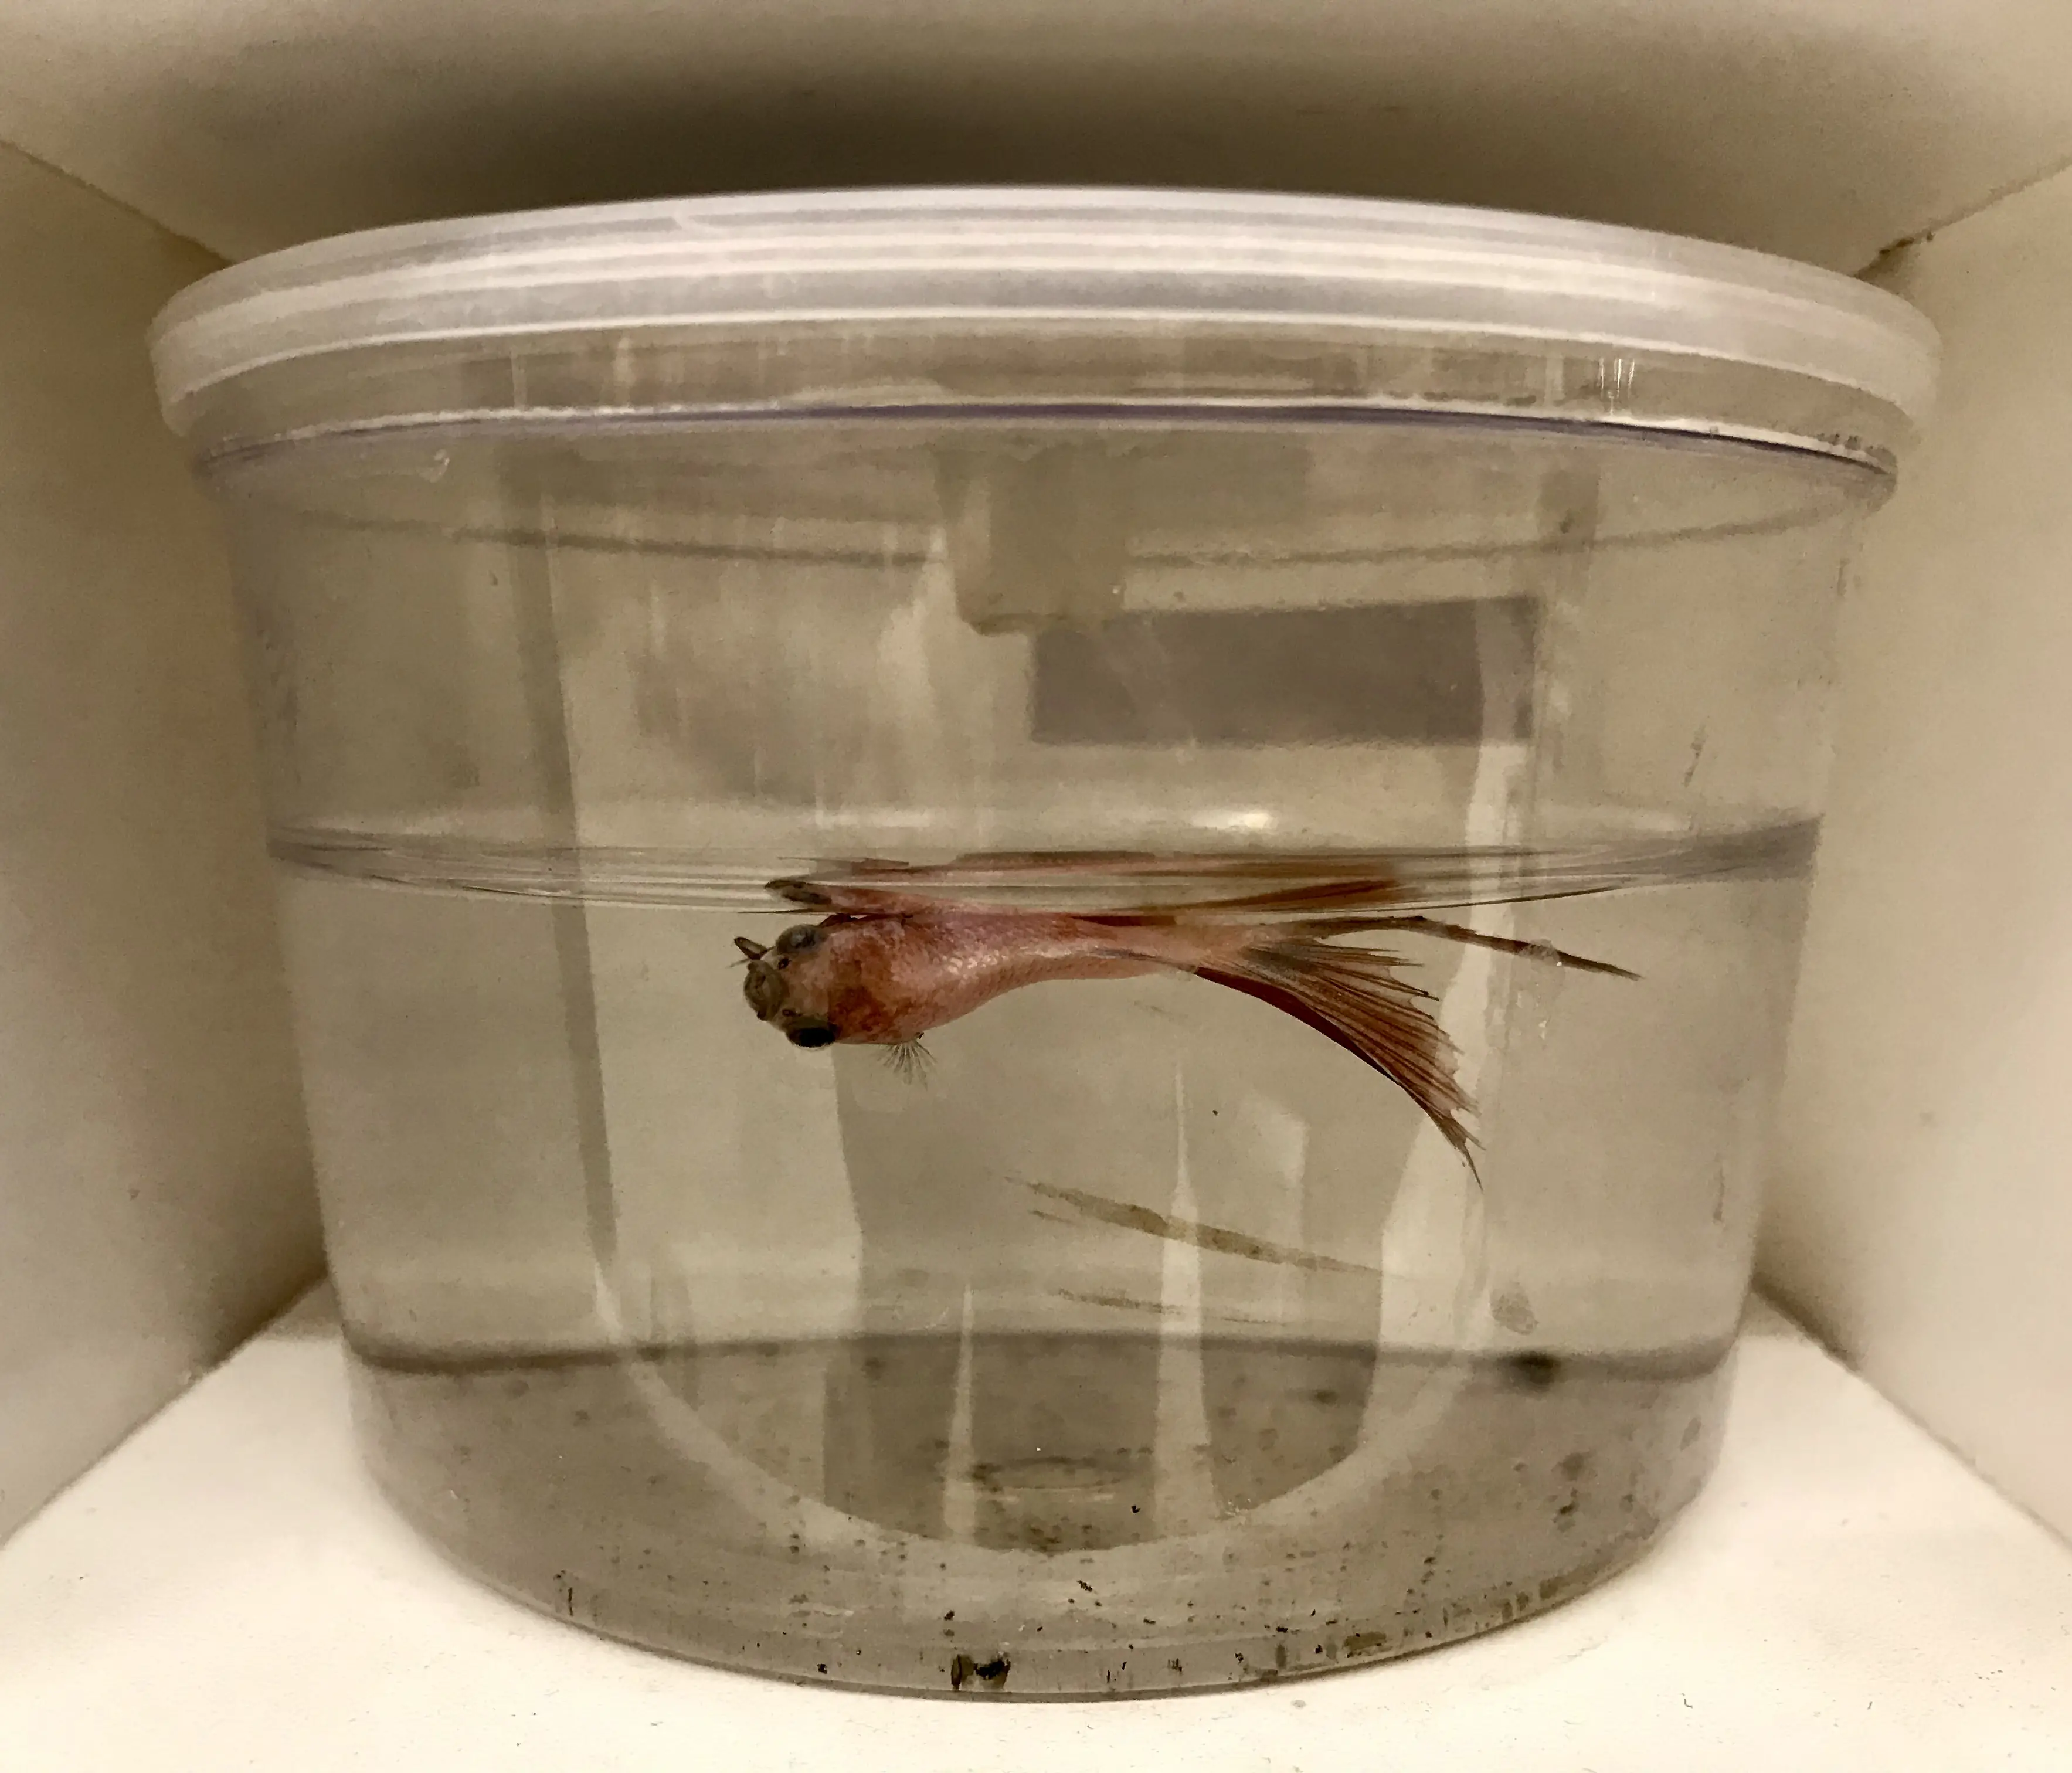 What to Do With a Dead Betta Fish?